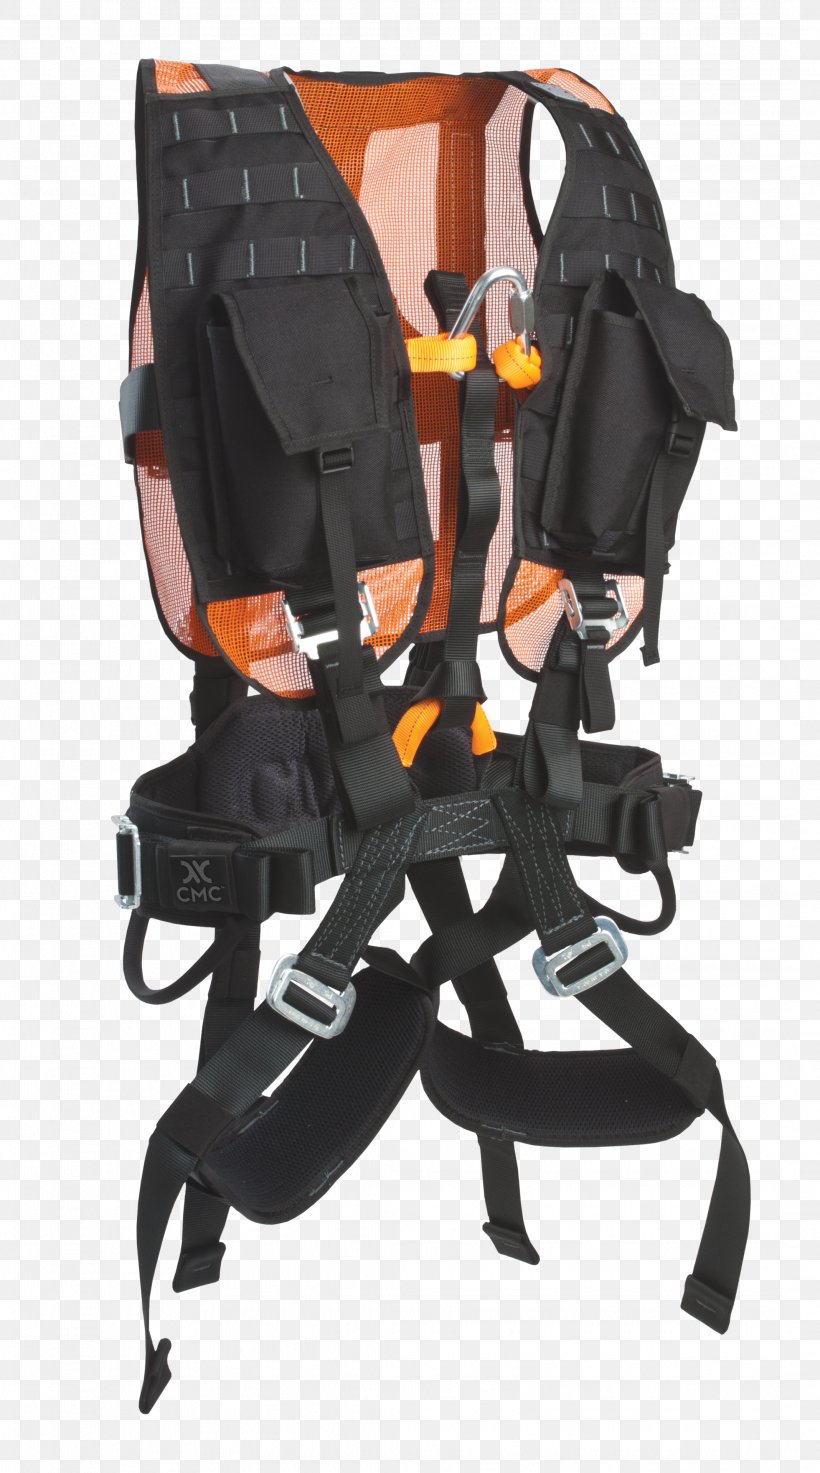 Climbing Harnesses Rescue Carabiner Rope Zip-line, PNG, 2137x3840px, Climbing Harnesses, Abseiling, Backpack, Belaying, Carabiner Download Free